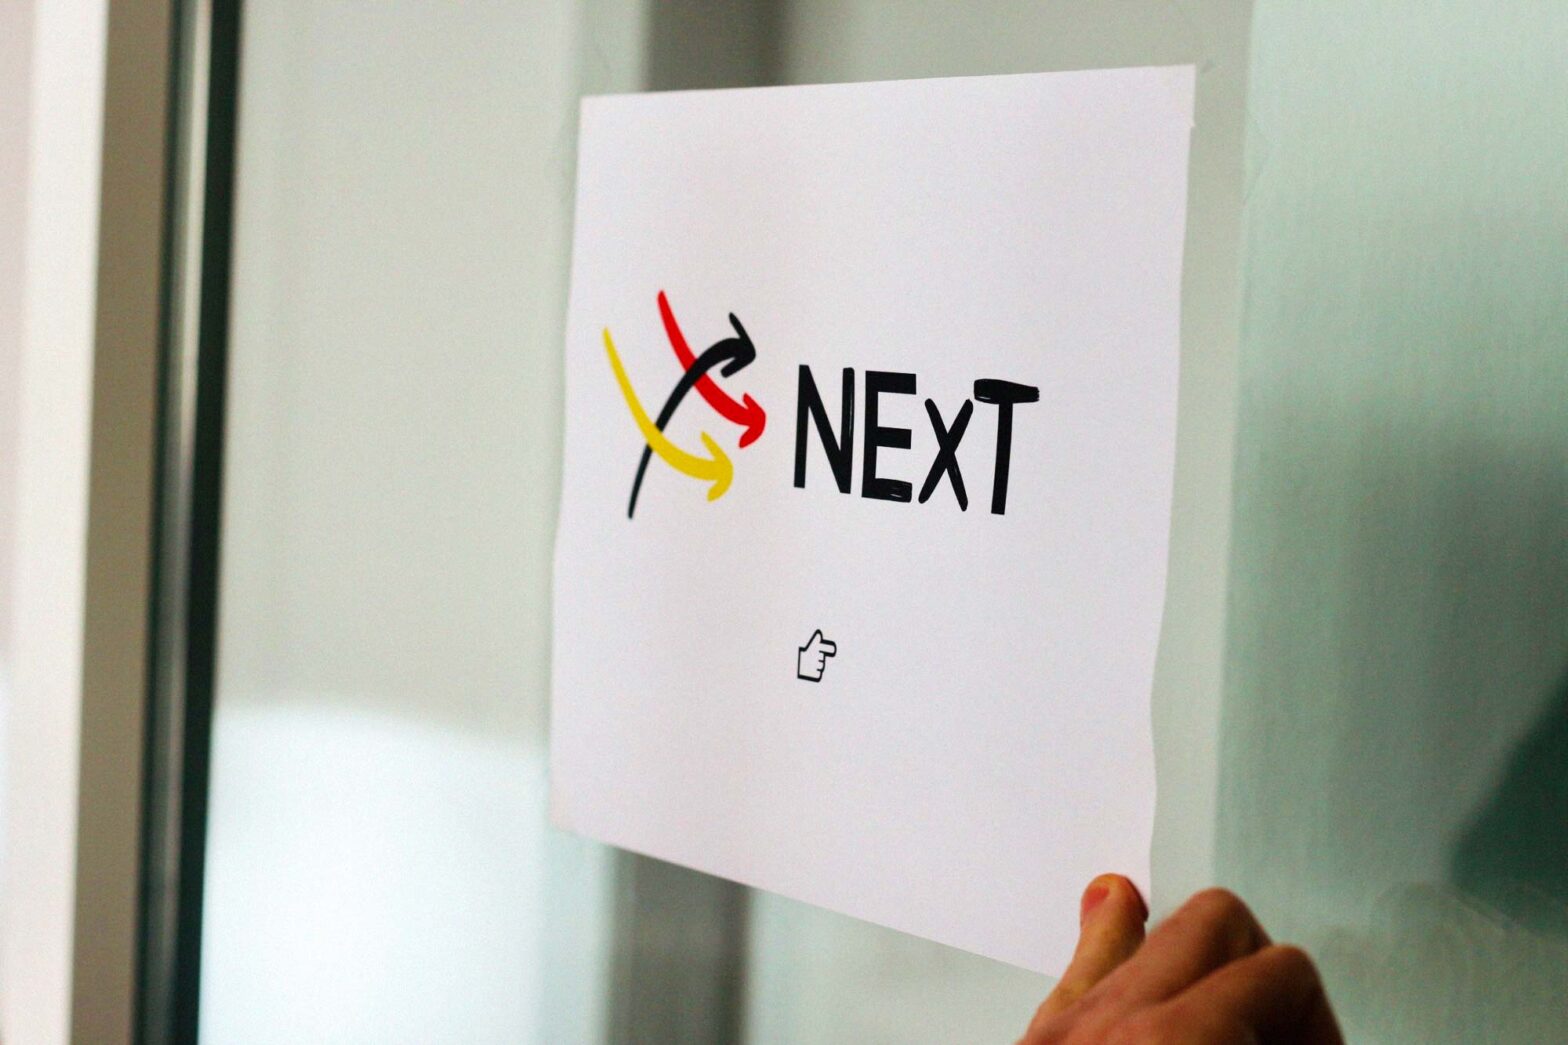 A sign with the logo of NExT with 3 hand-drawn arrows in black, red and yellow taped to a glass door with a hand touching it